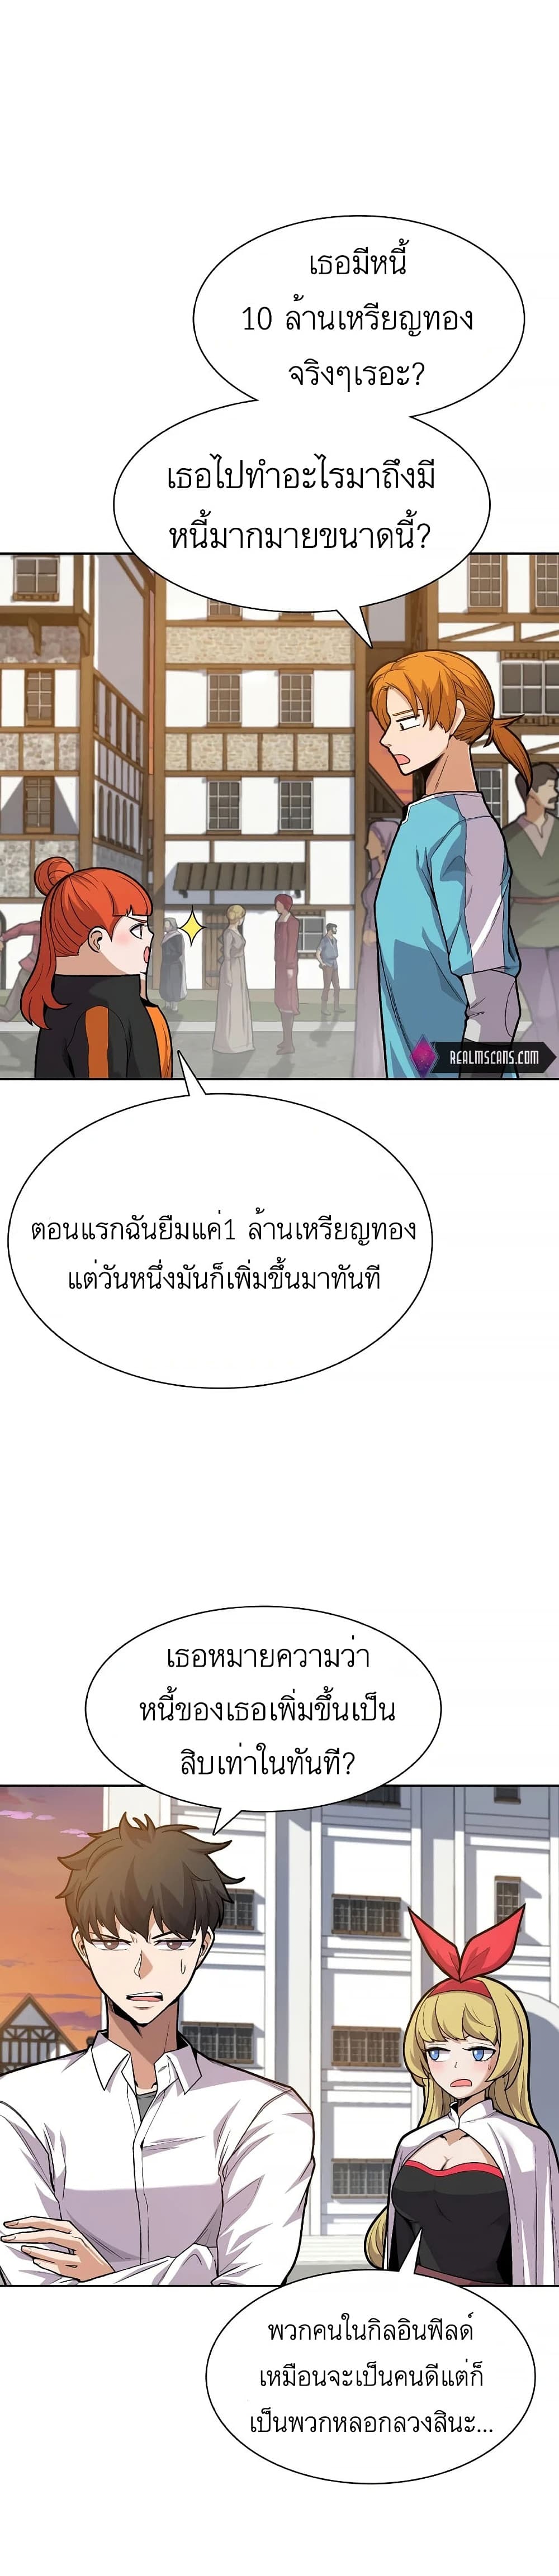 Raising Newbie Heroes In Another World ตอนที่ 14 (9)